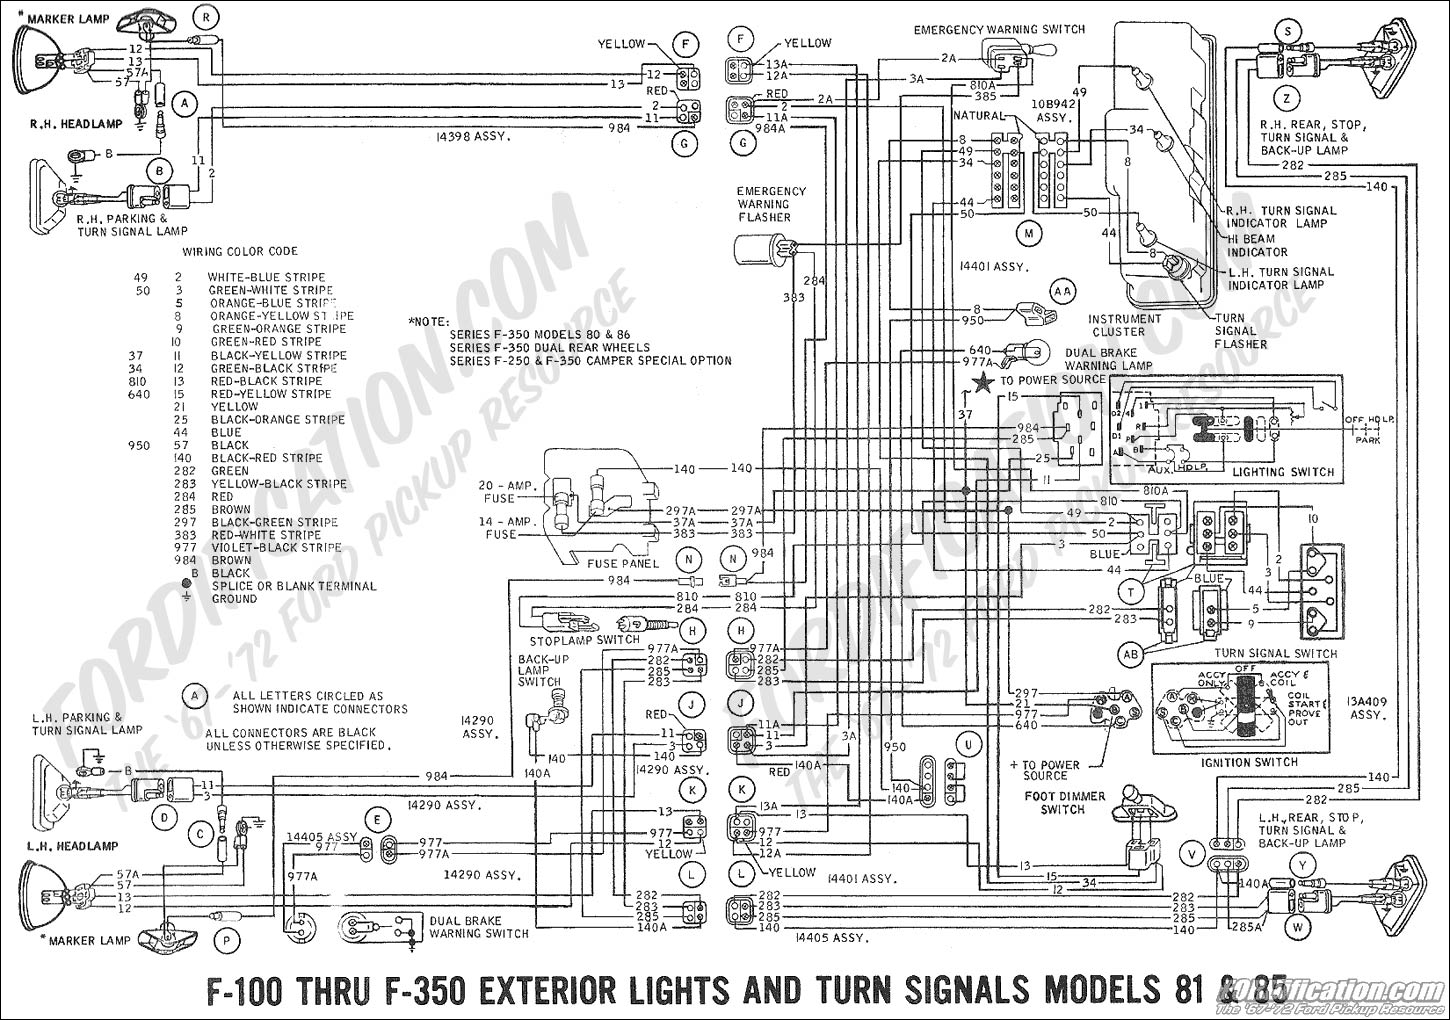 Ford Wiring Diagram Online from www.fordification.com